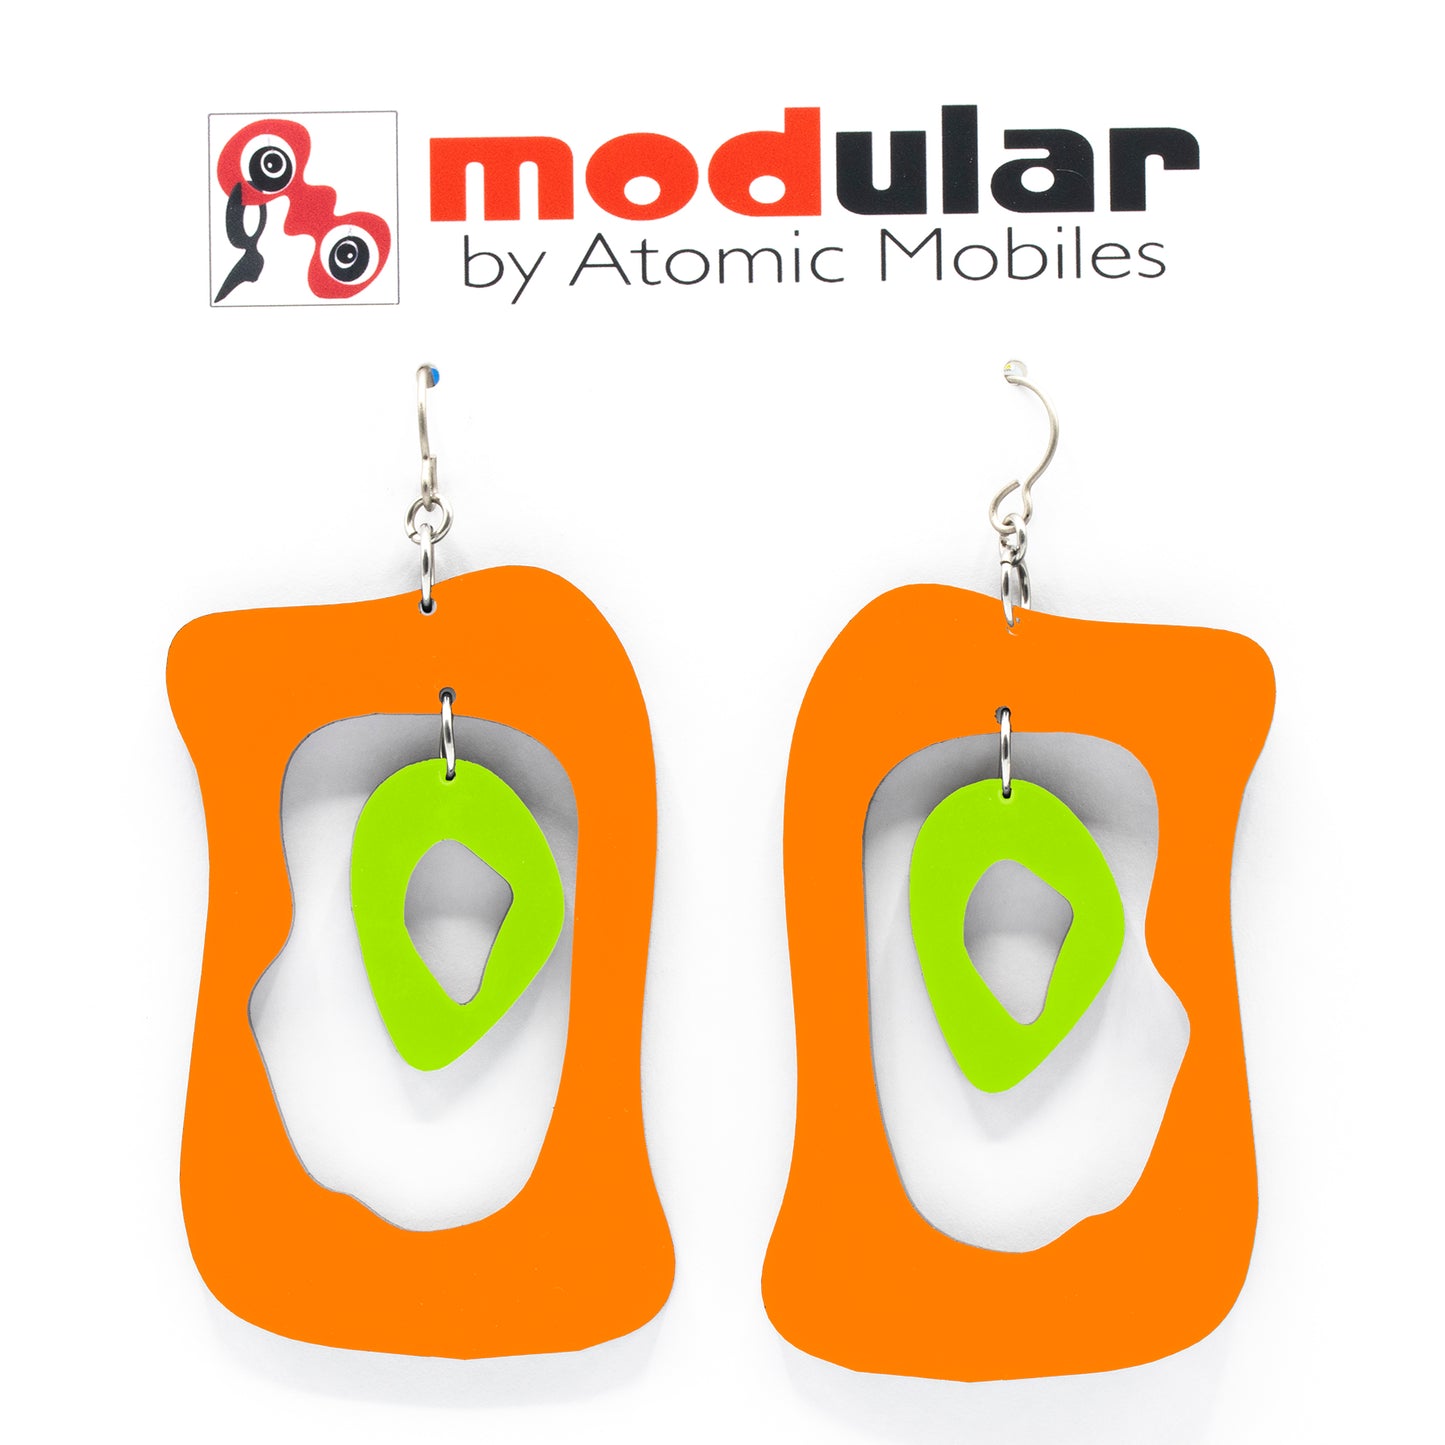 MODular Earrings - Modern Bliss Statement Earrings in Orange and Lime by AtomicMobiles.com - retro era inspired mod handmade jewelry